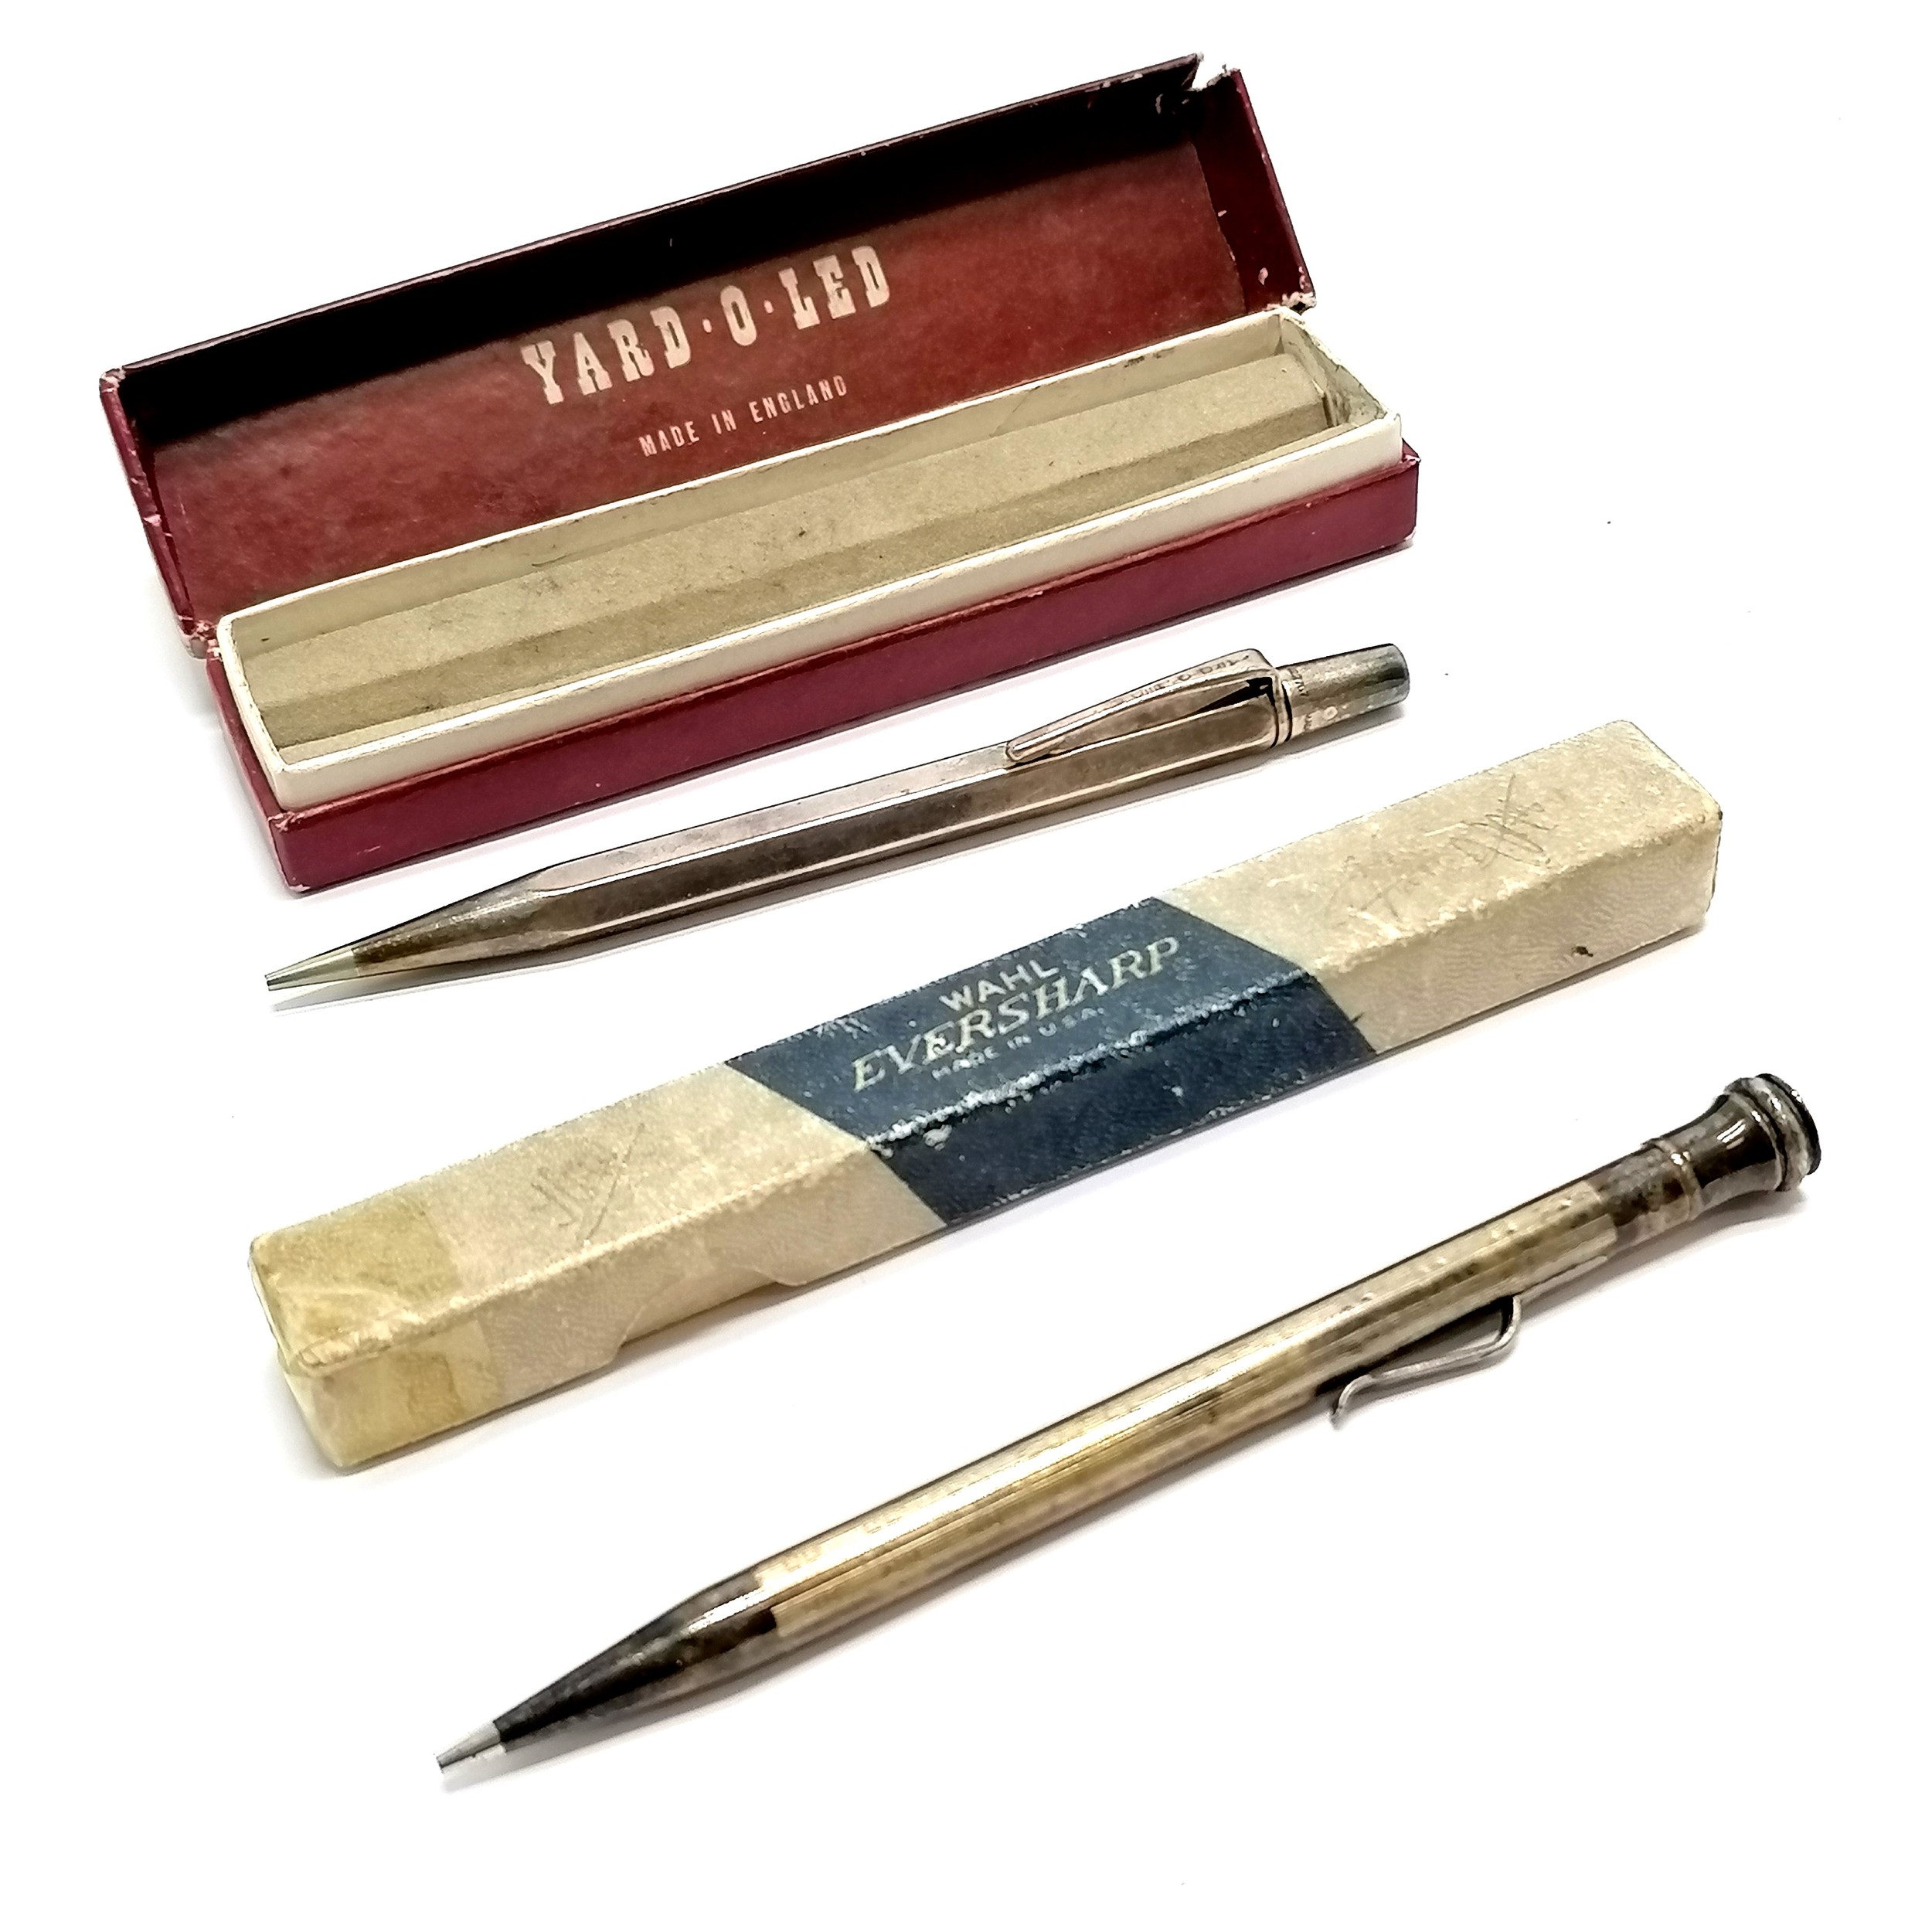 2 x vintage boxed silver cased pencils - Wahl Eversharp & Yard-o-led ~ both in used condition